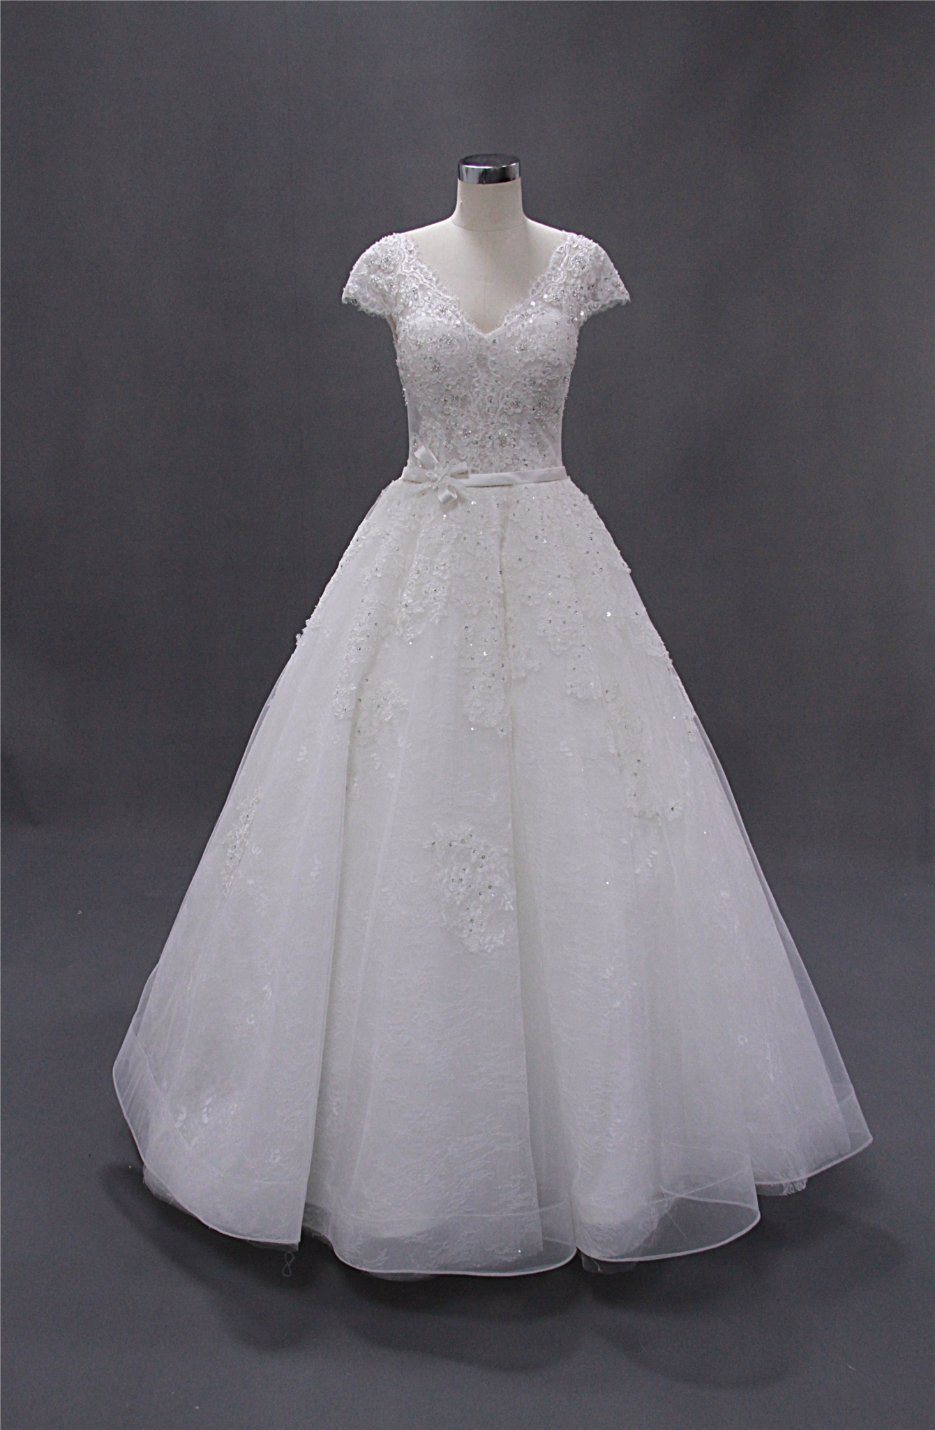 French Lace Sequins Ballgown Bridal Wedding Dress Wedding Gown